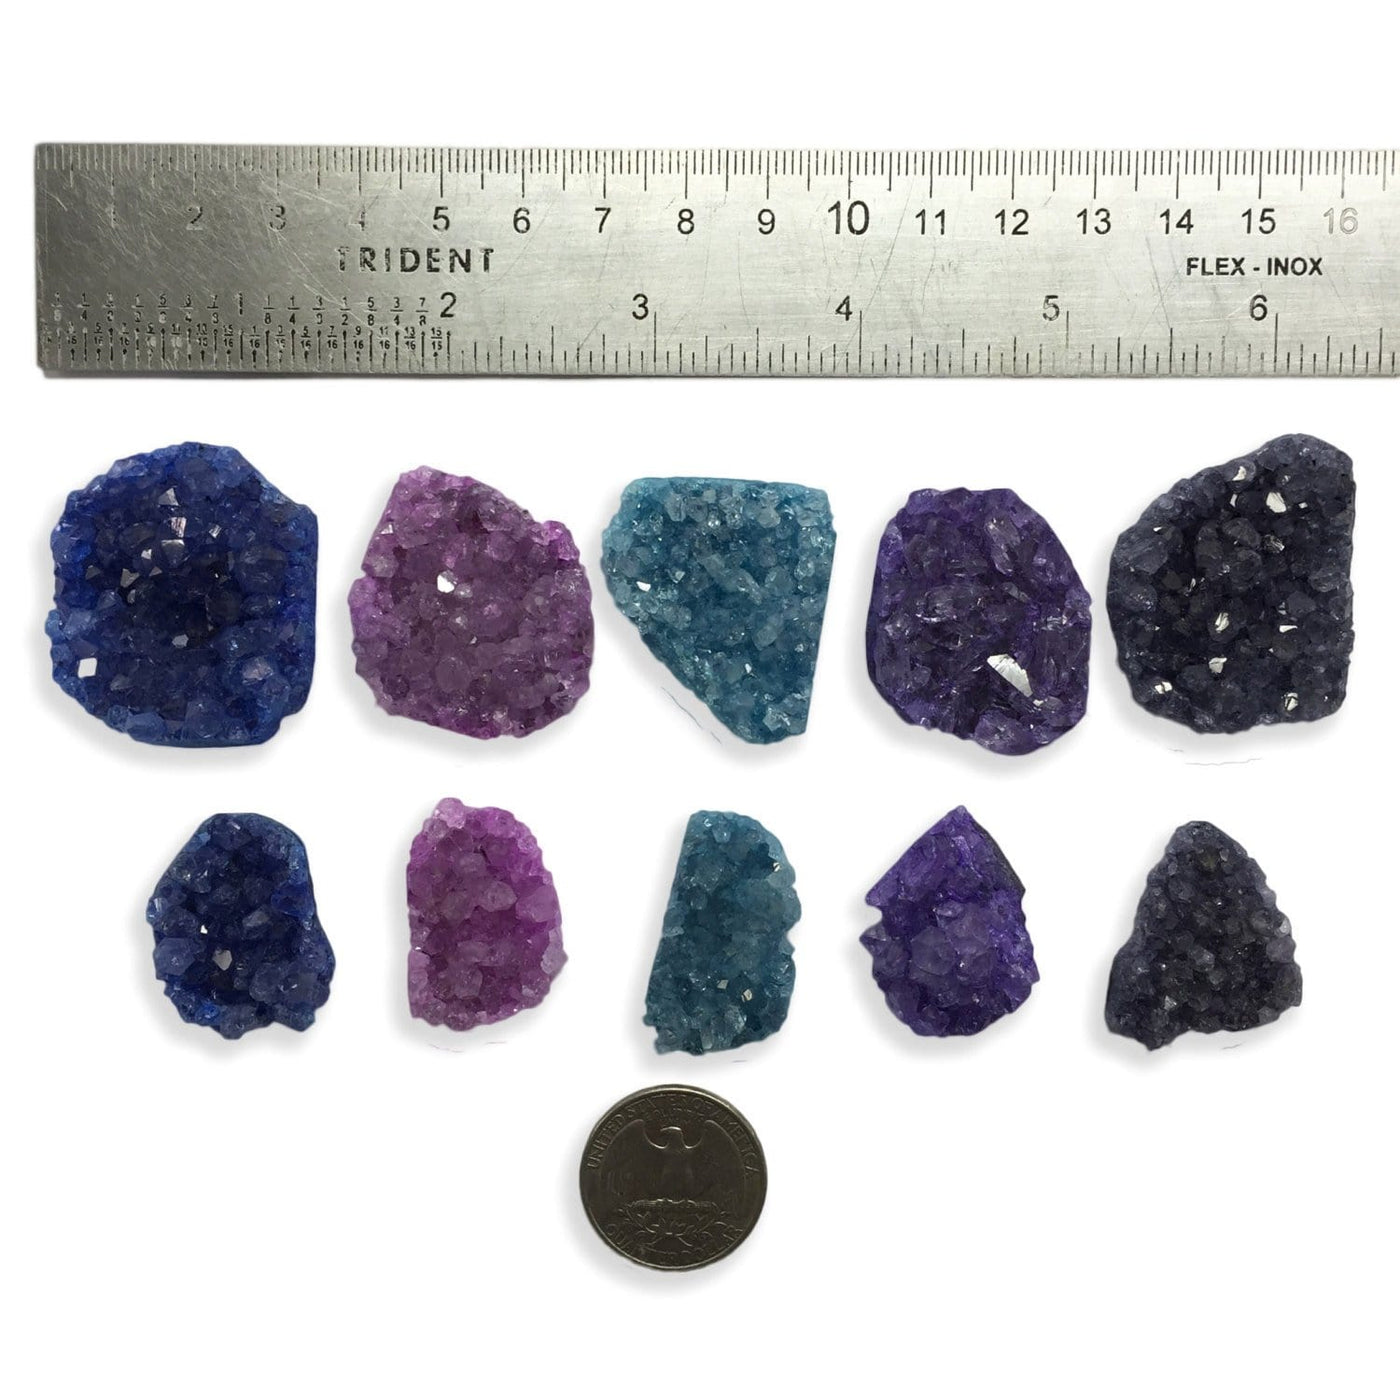 druzy cabochons next to a ruler for size reference